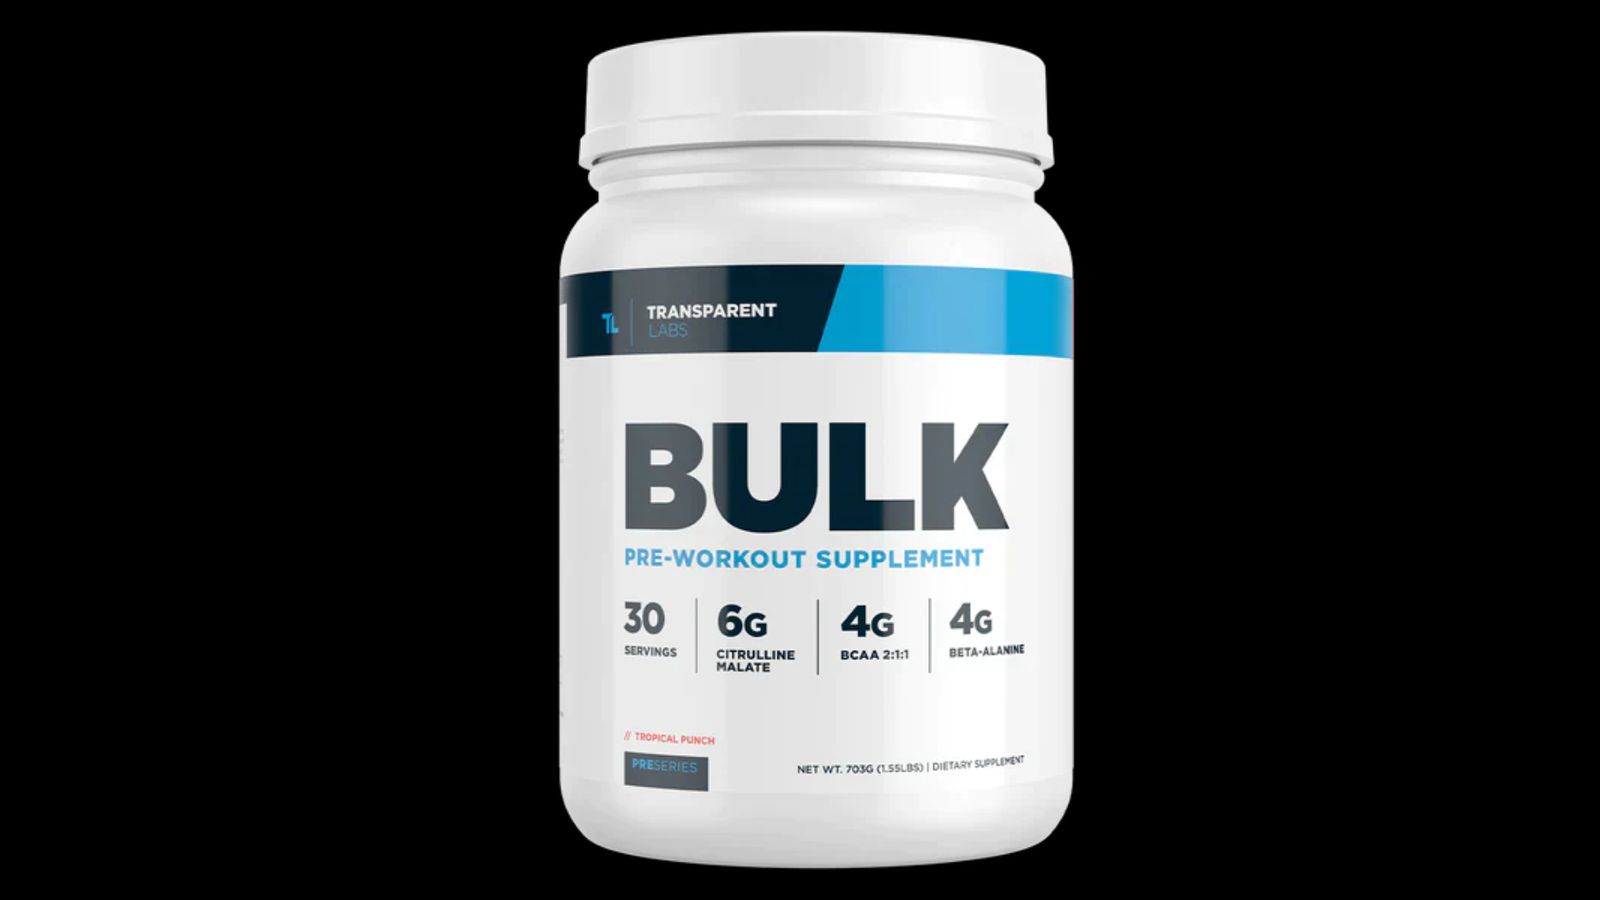 Transparent Labs Bulk Pre-Workout product image of a white container with dark and light blue labeling